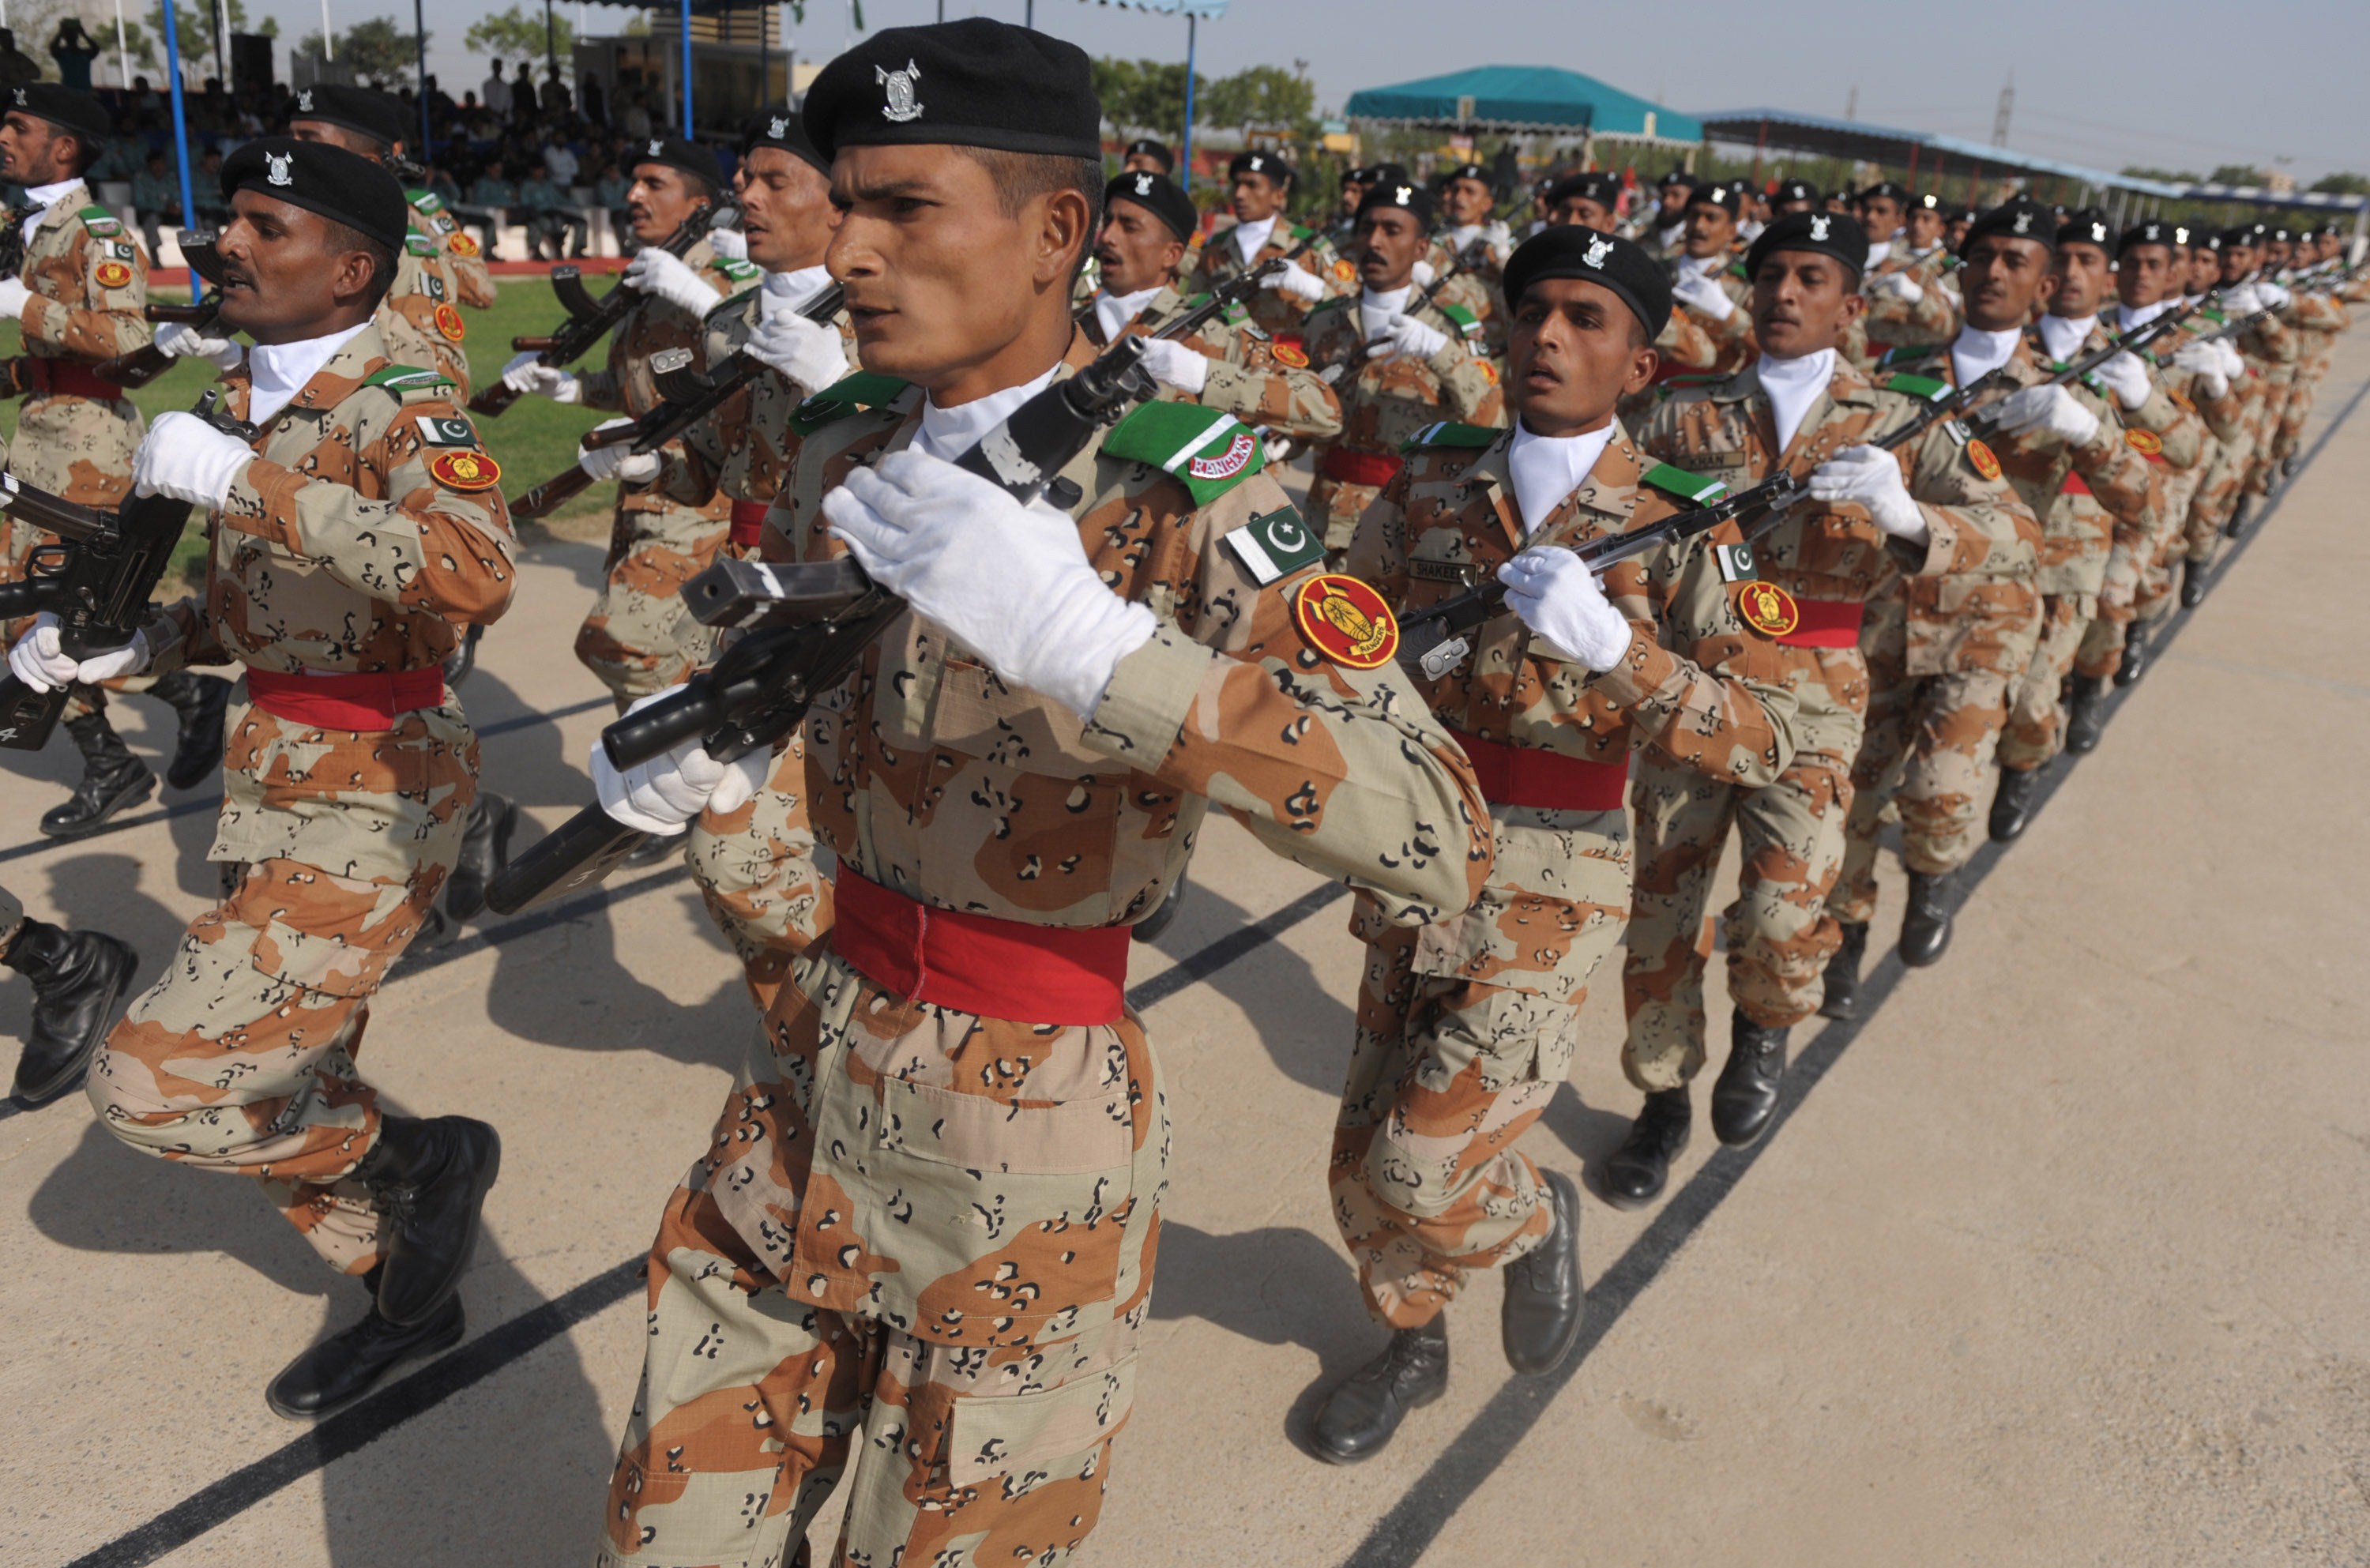 Pakistani paramilitary soldiers march during the 18th passing out parade for the Rangers basic recruits training course at the Sindh Rangers Training Centre in Karachi on Nov. 11, 2014 (Rizwan Tabassum—AFP/Getty Images)